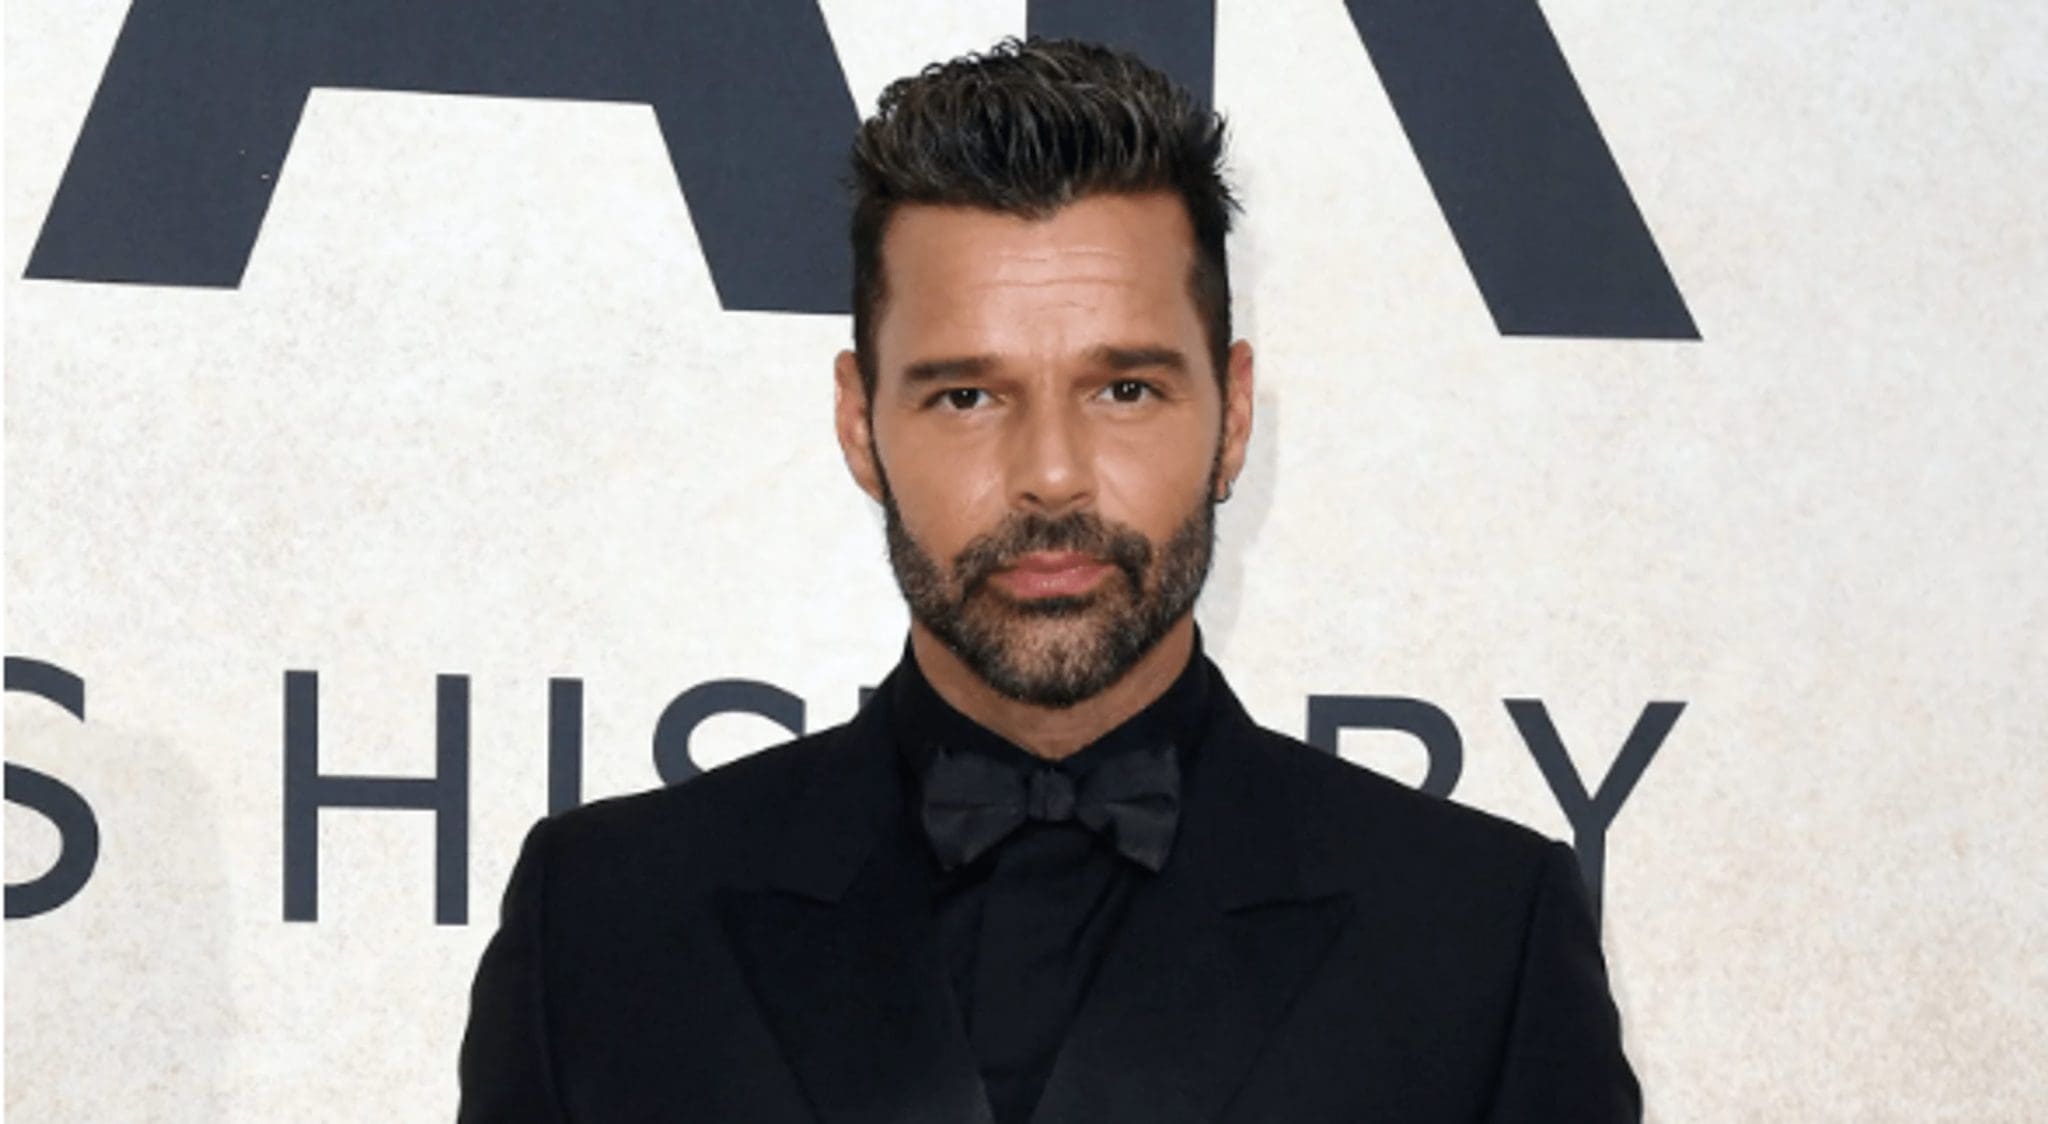 Ricky Martin is a 13-year-old son who largely inherited the charismatic appearance of his father